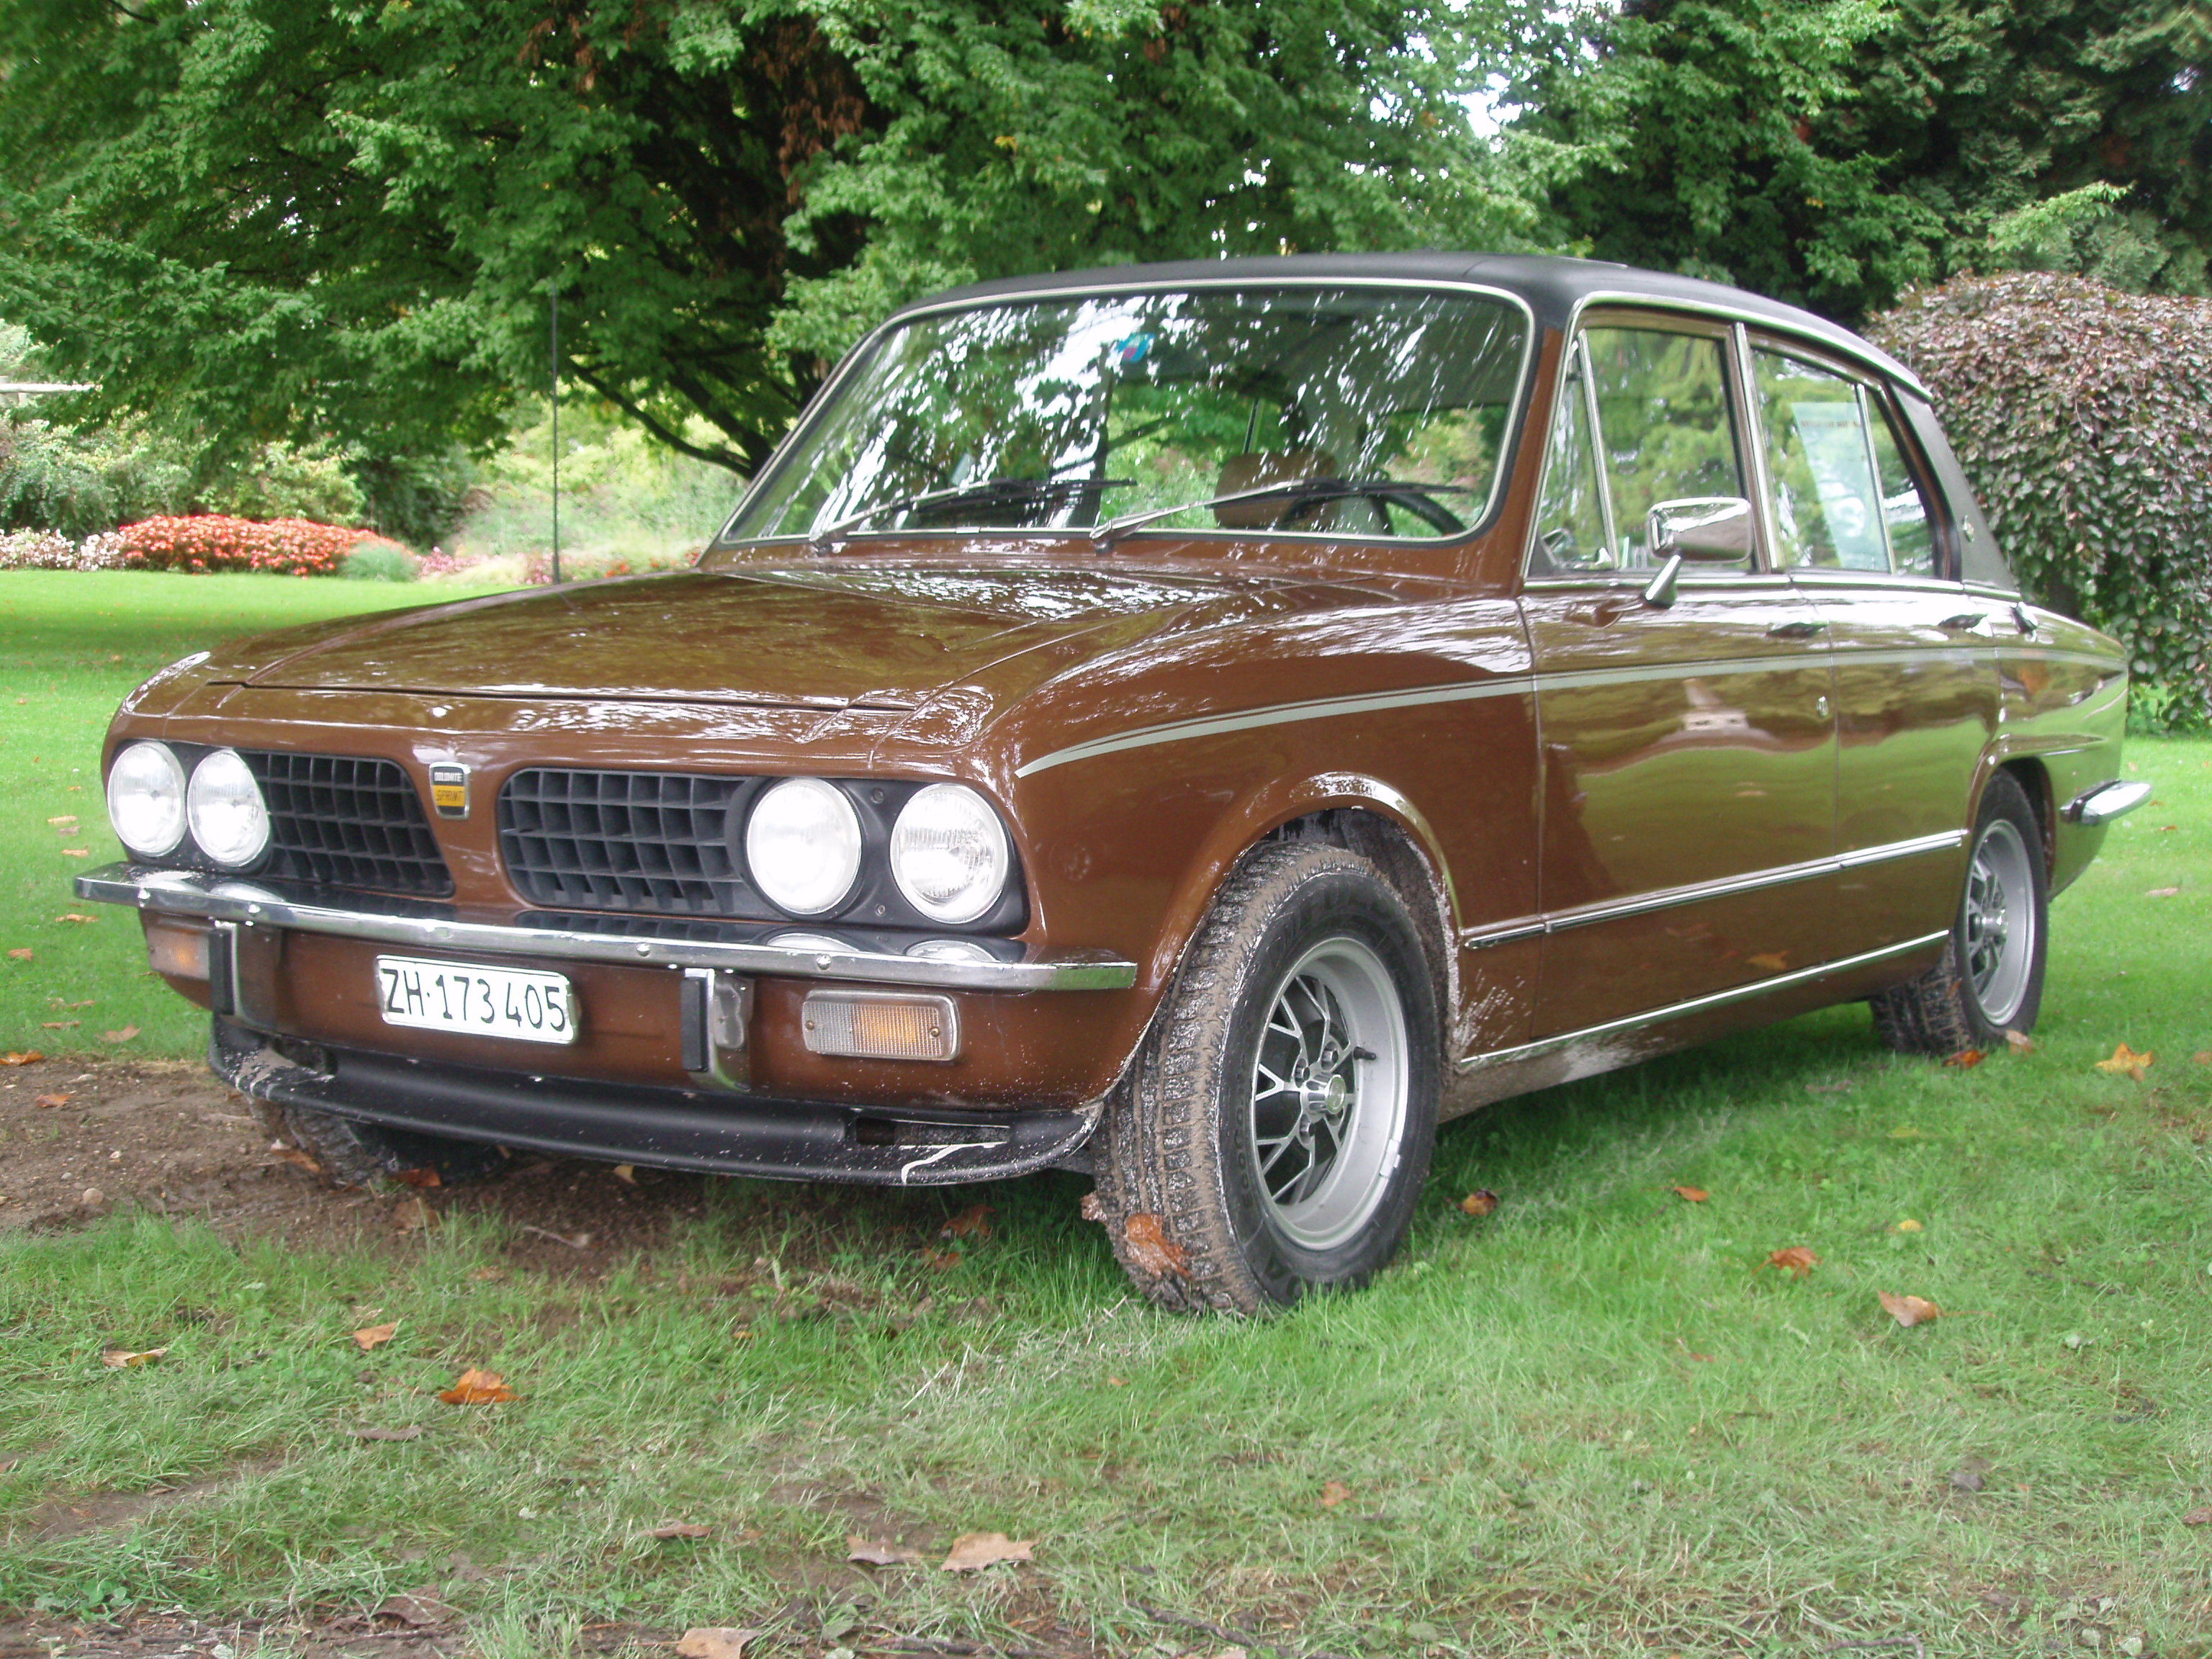 Grunde Galaxy Rejsende købmand File:1978 Russet Brown Triumph Dolomite Sprint in Morges 2013 - Front left  (level).jpg - Wikimedia Commons